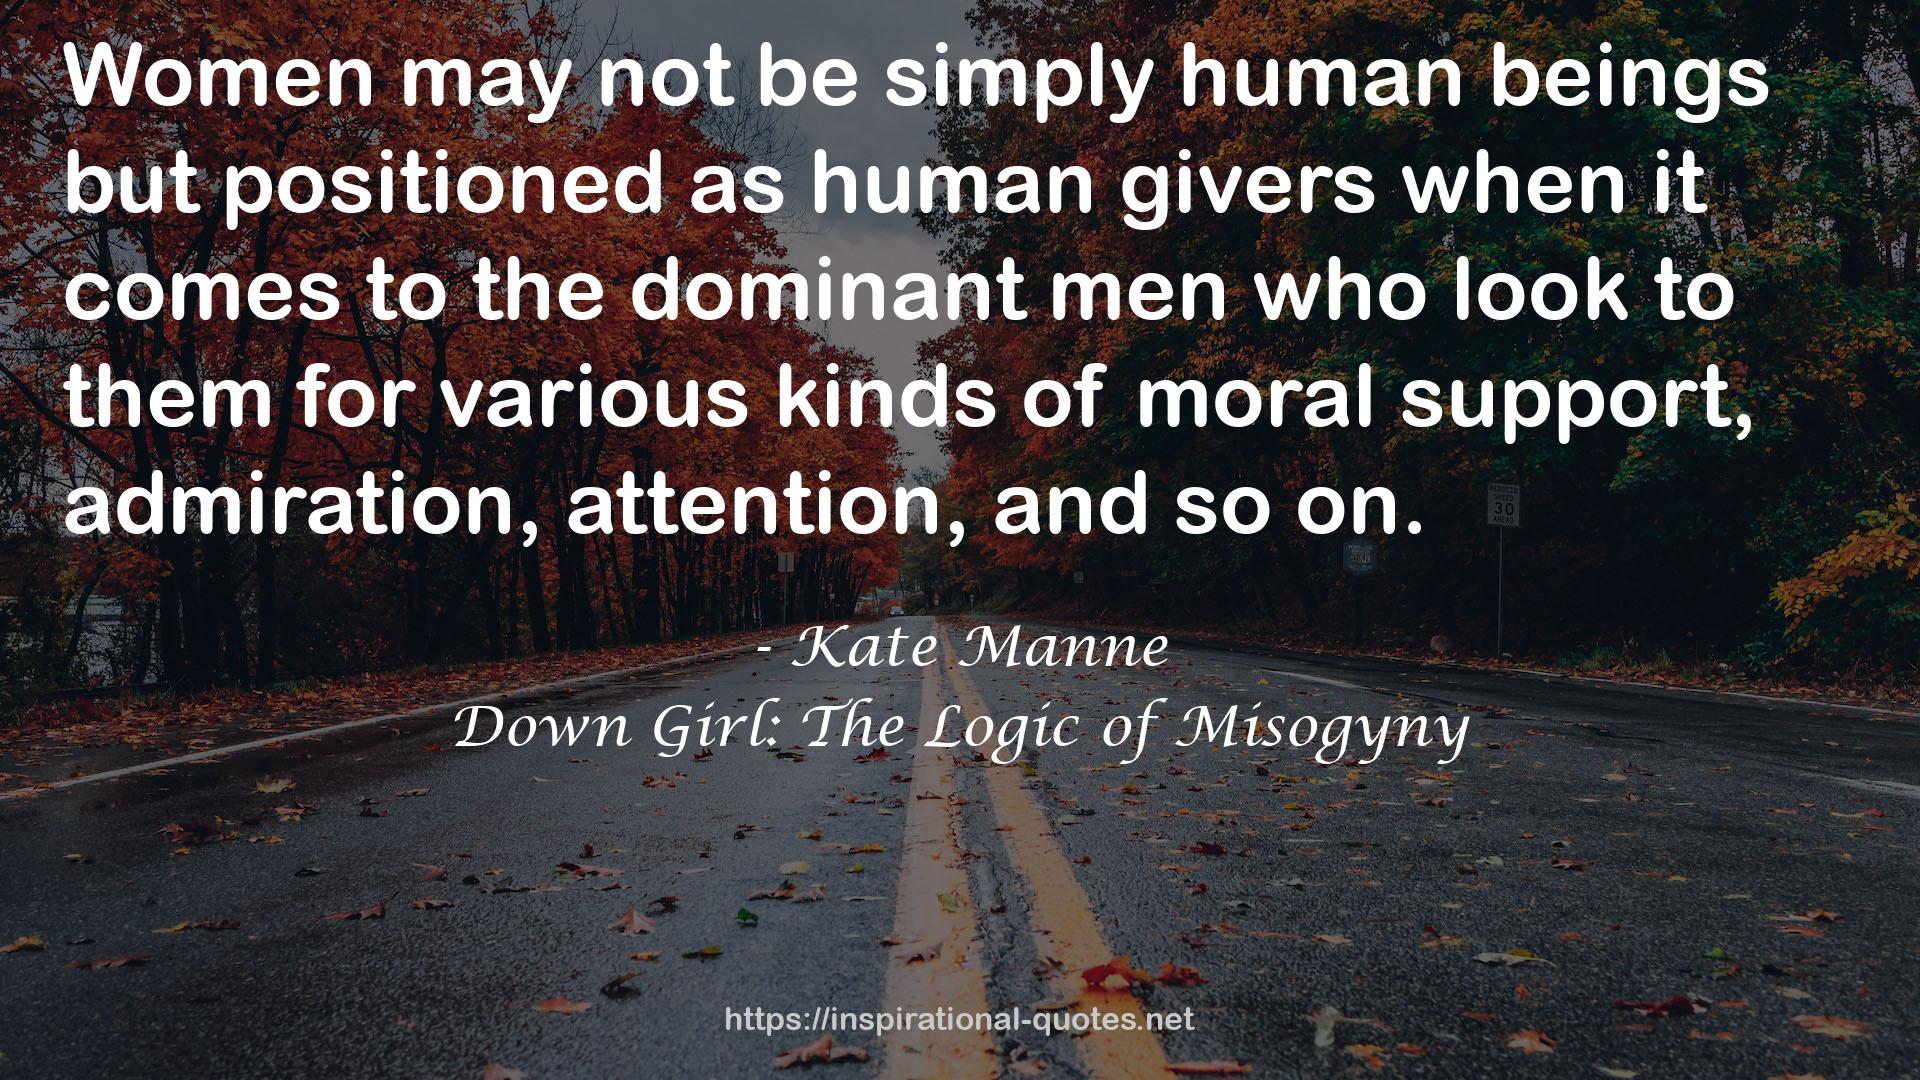 Down Girl: The Logic of Misogyny QUOTES